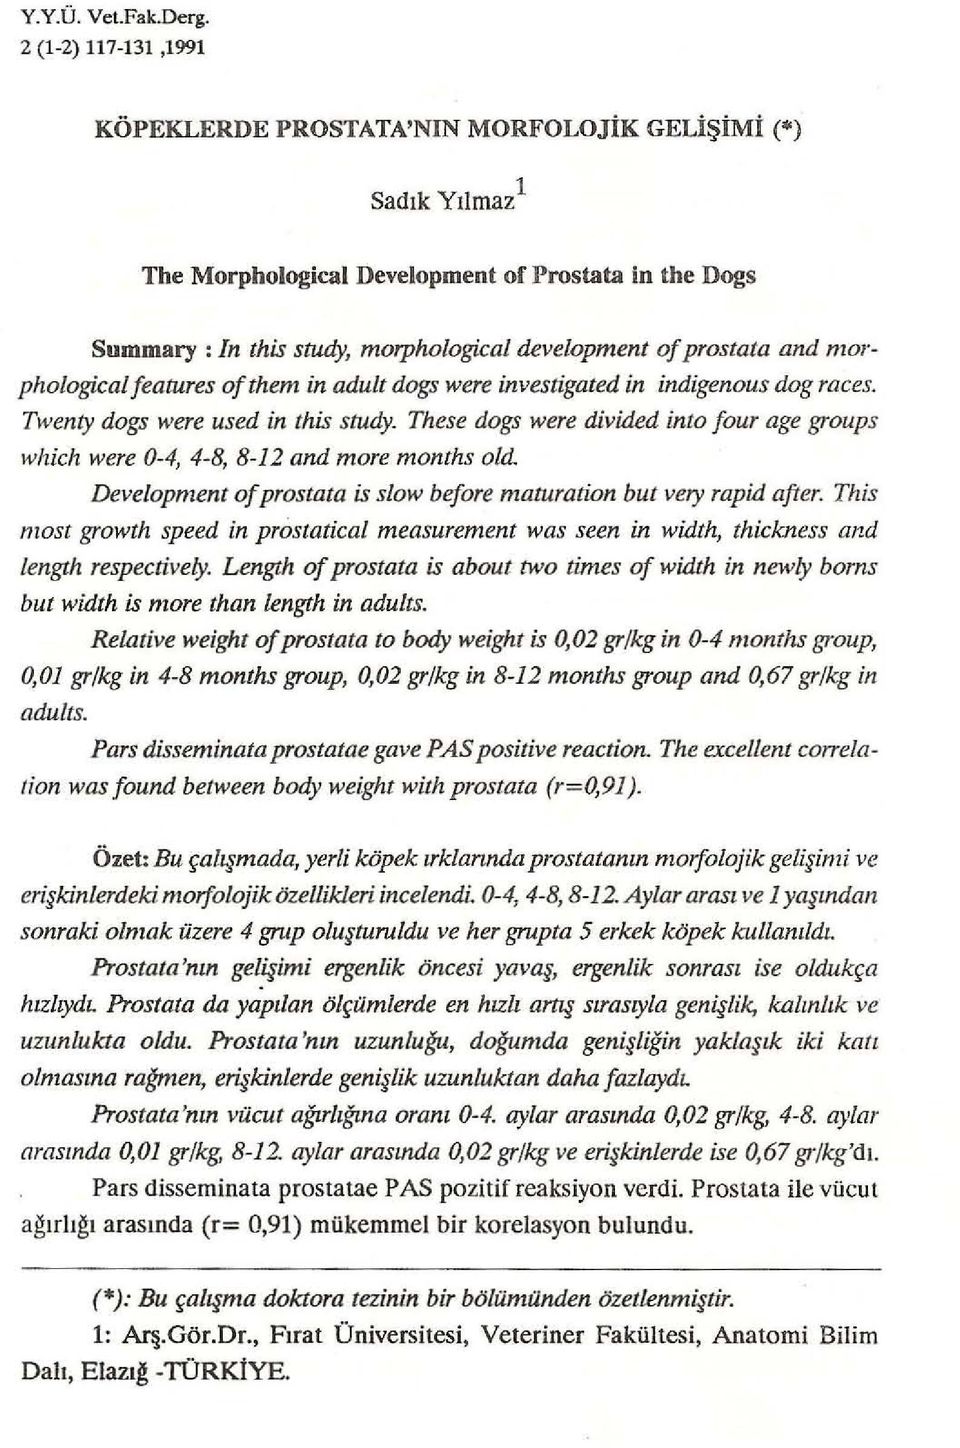 and morphological features of them in adult dogs were investigated in indigenous dog races. Twenty dogs were used in this study.